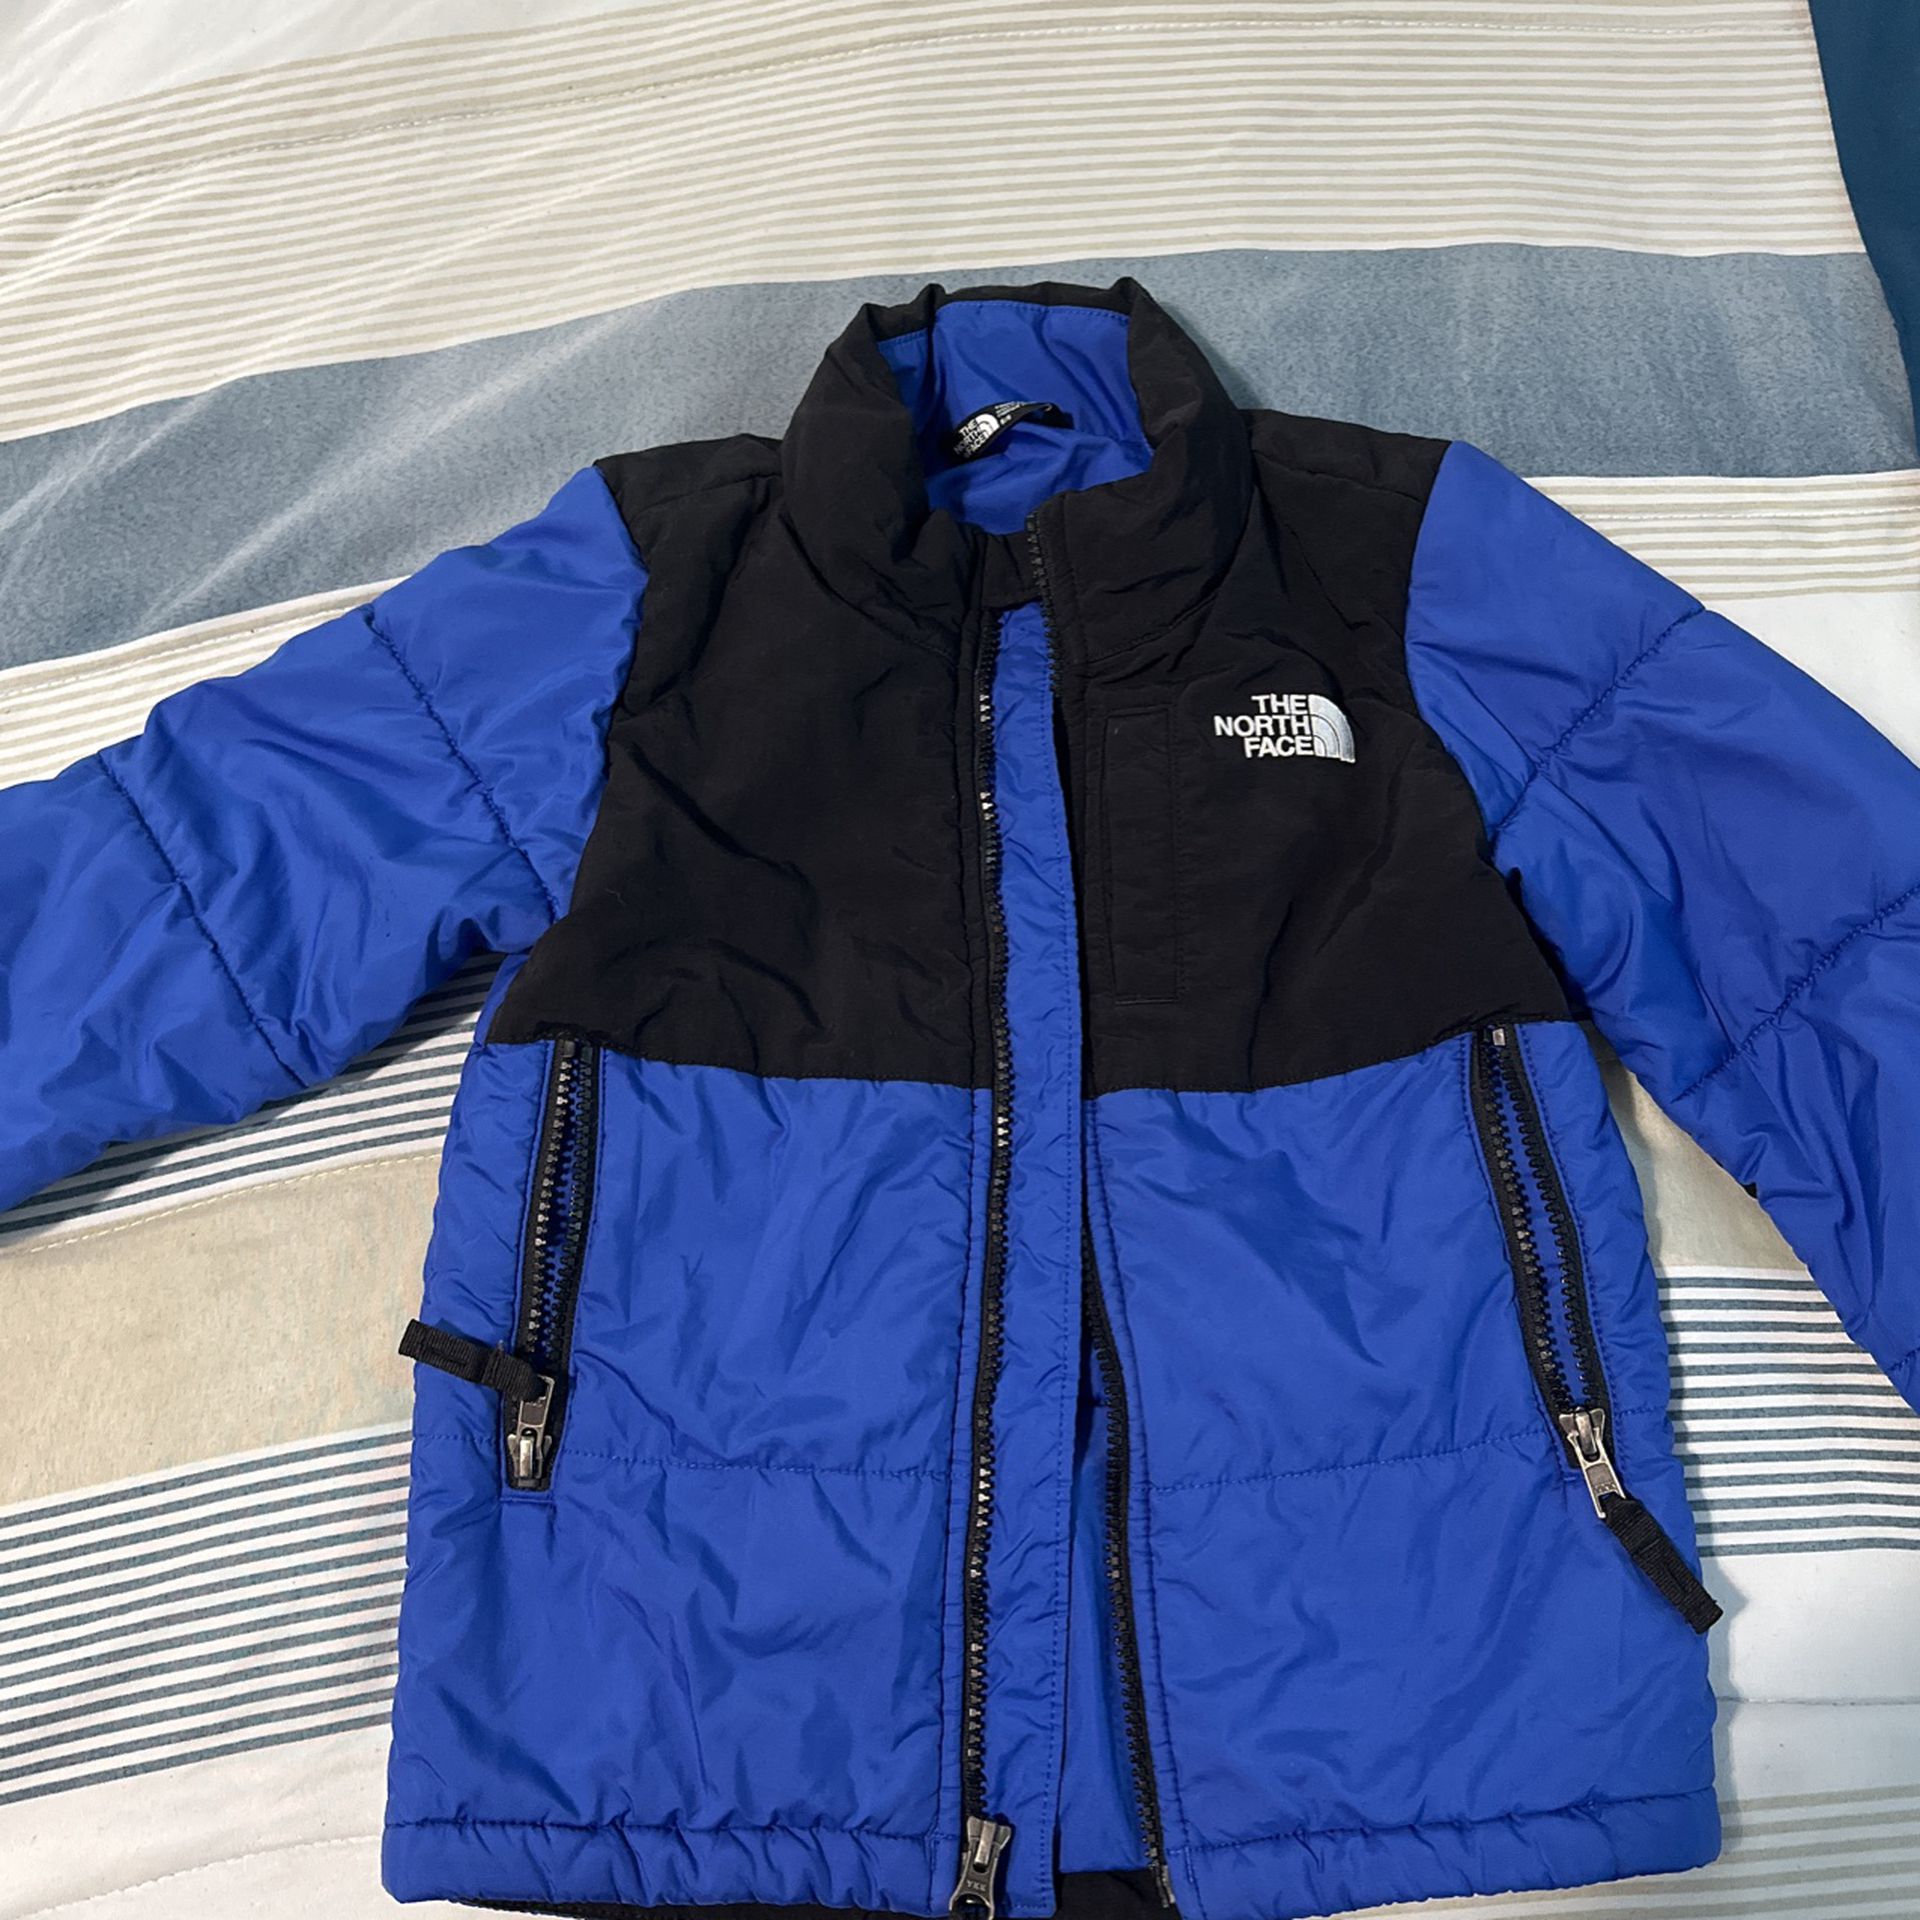 North Face Jacket Size 5